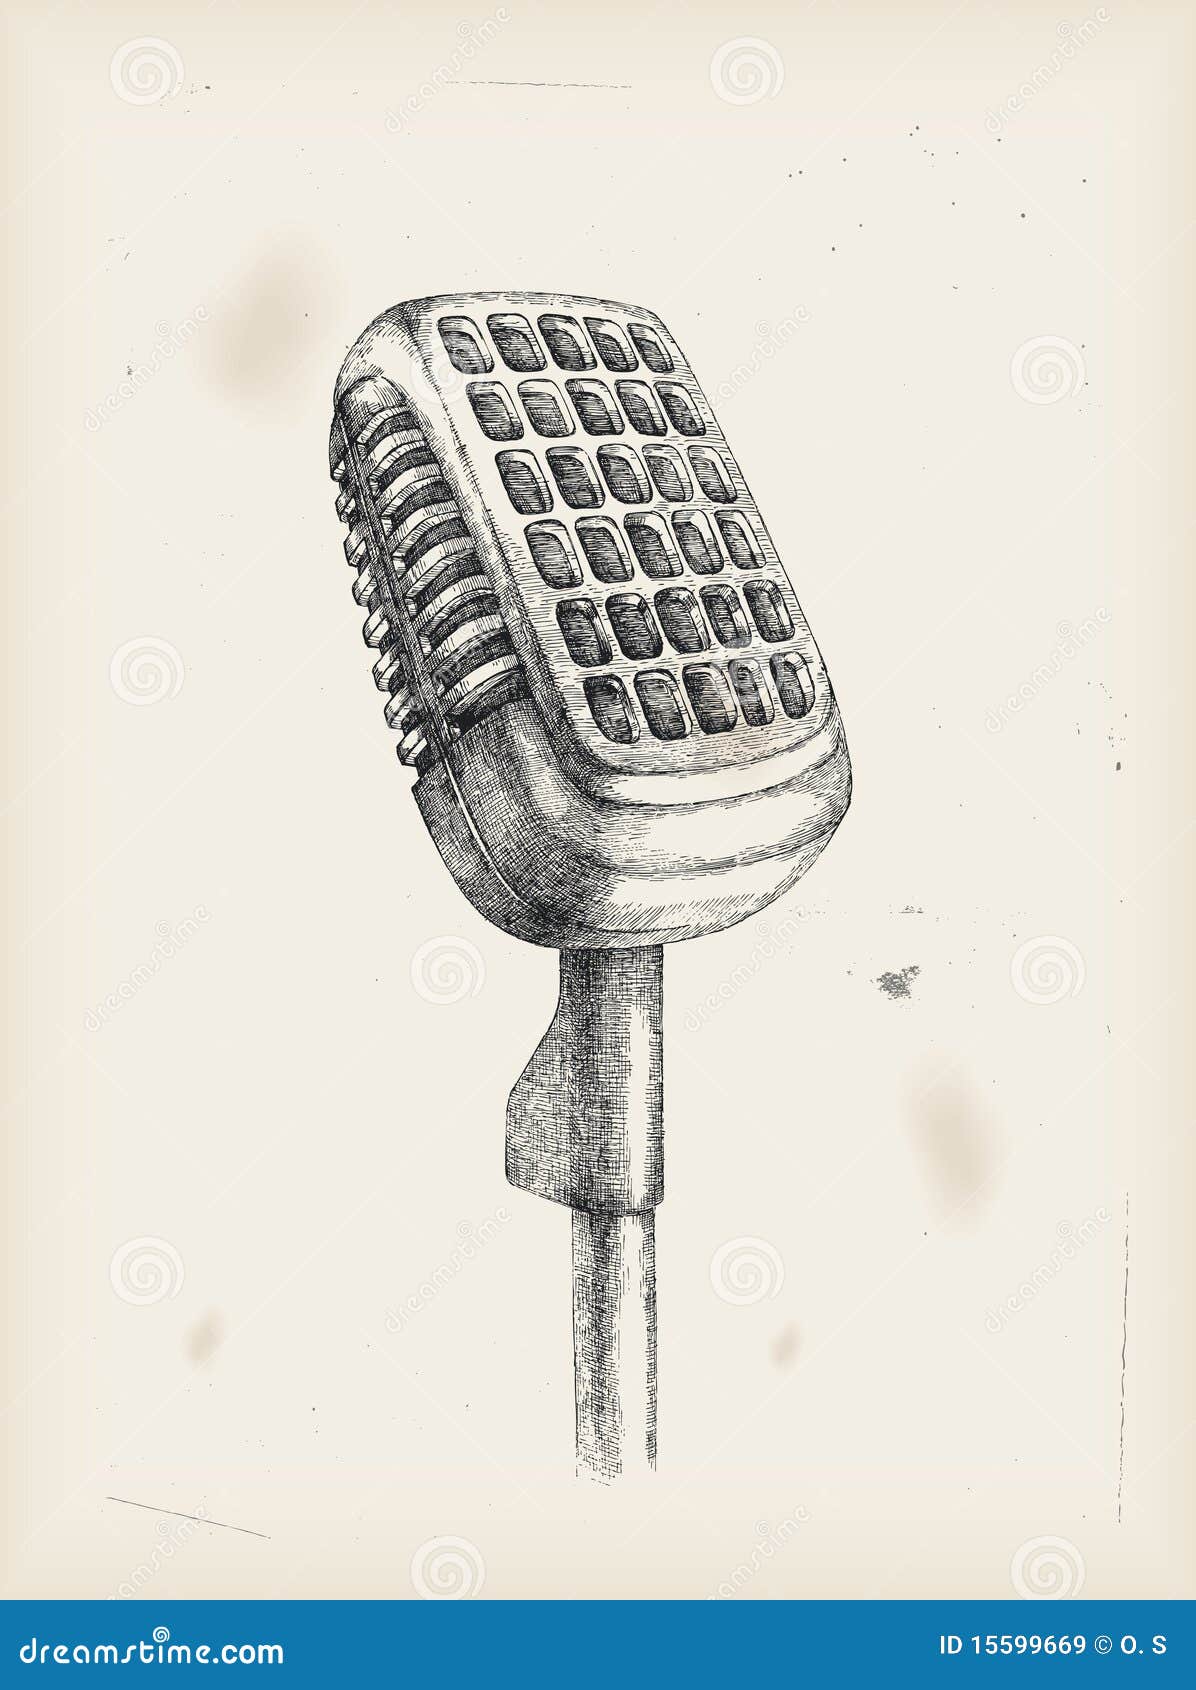 How to Draw a Microphone  DrawingNow